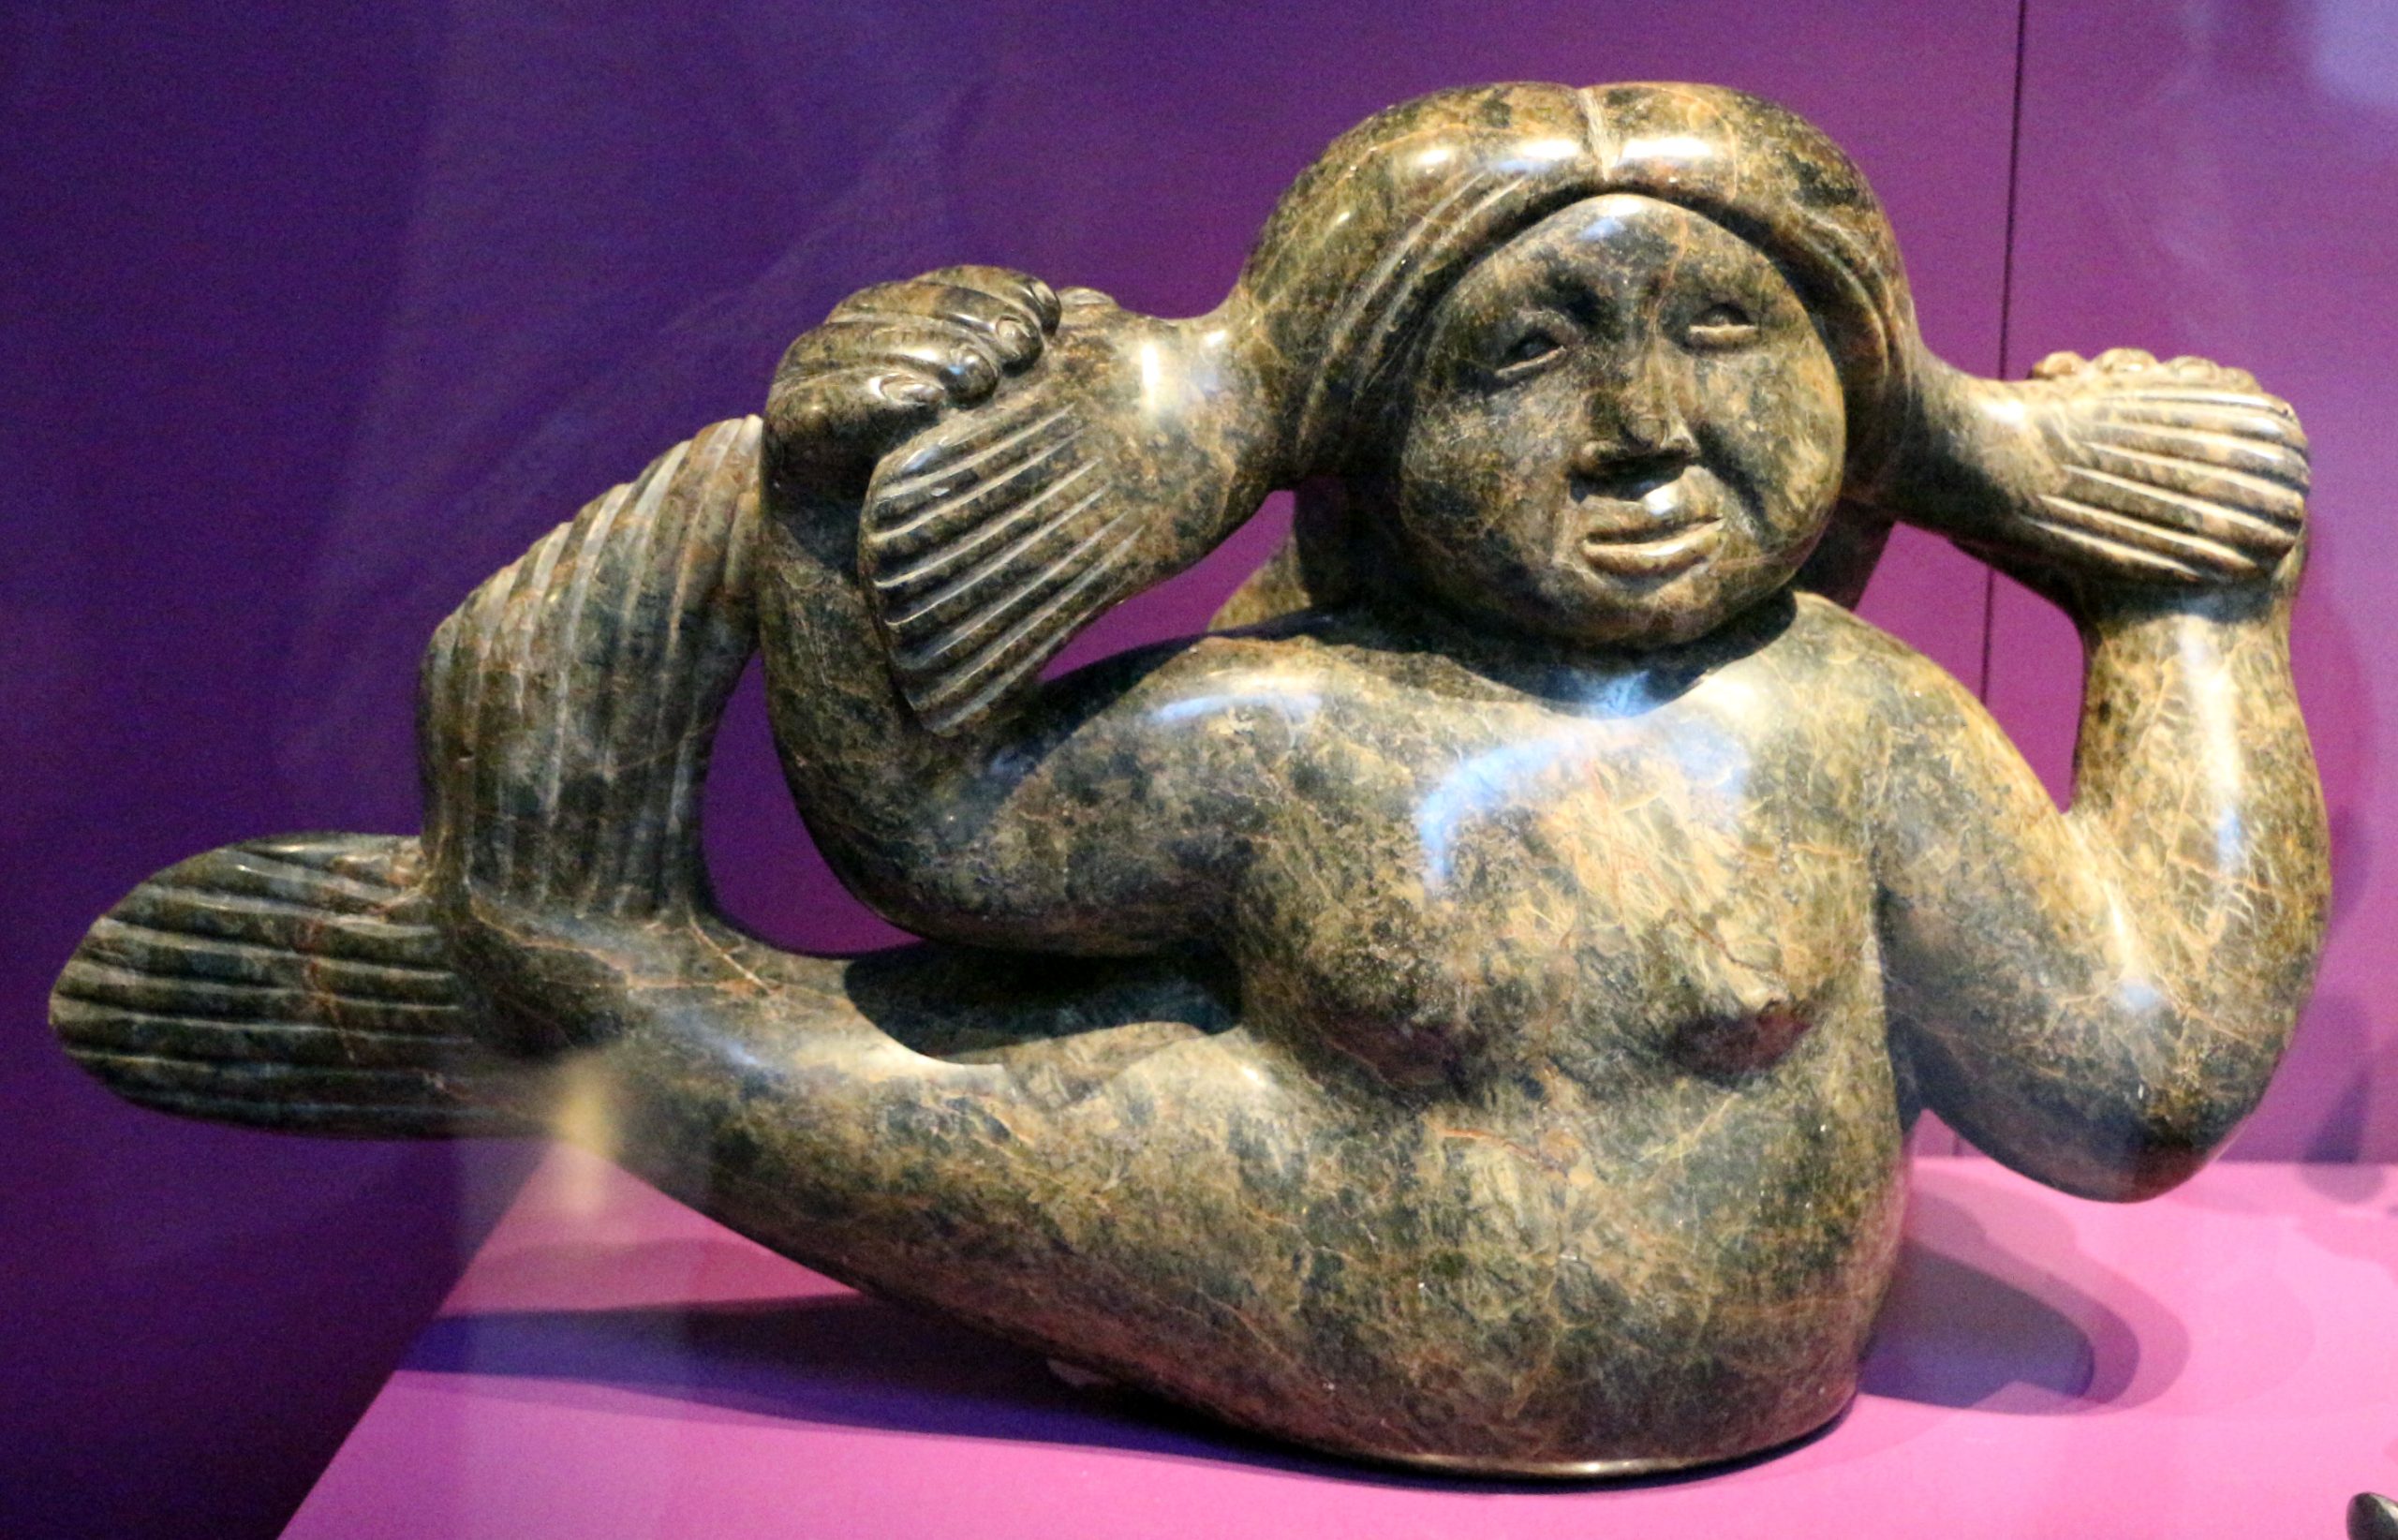 A sculpture depicting a mythical sea goddess. A woman's head, torso and arms with the tail of a sea creature.